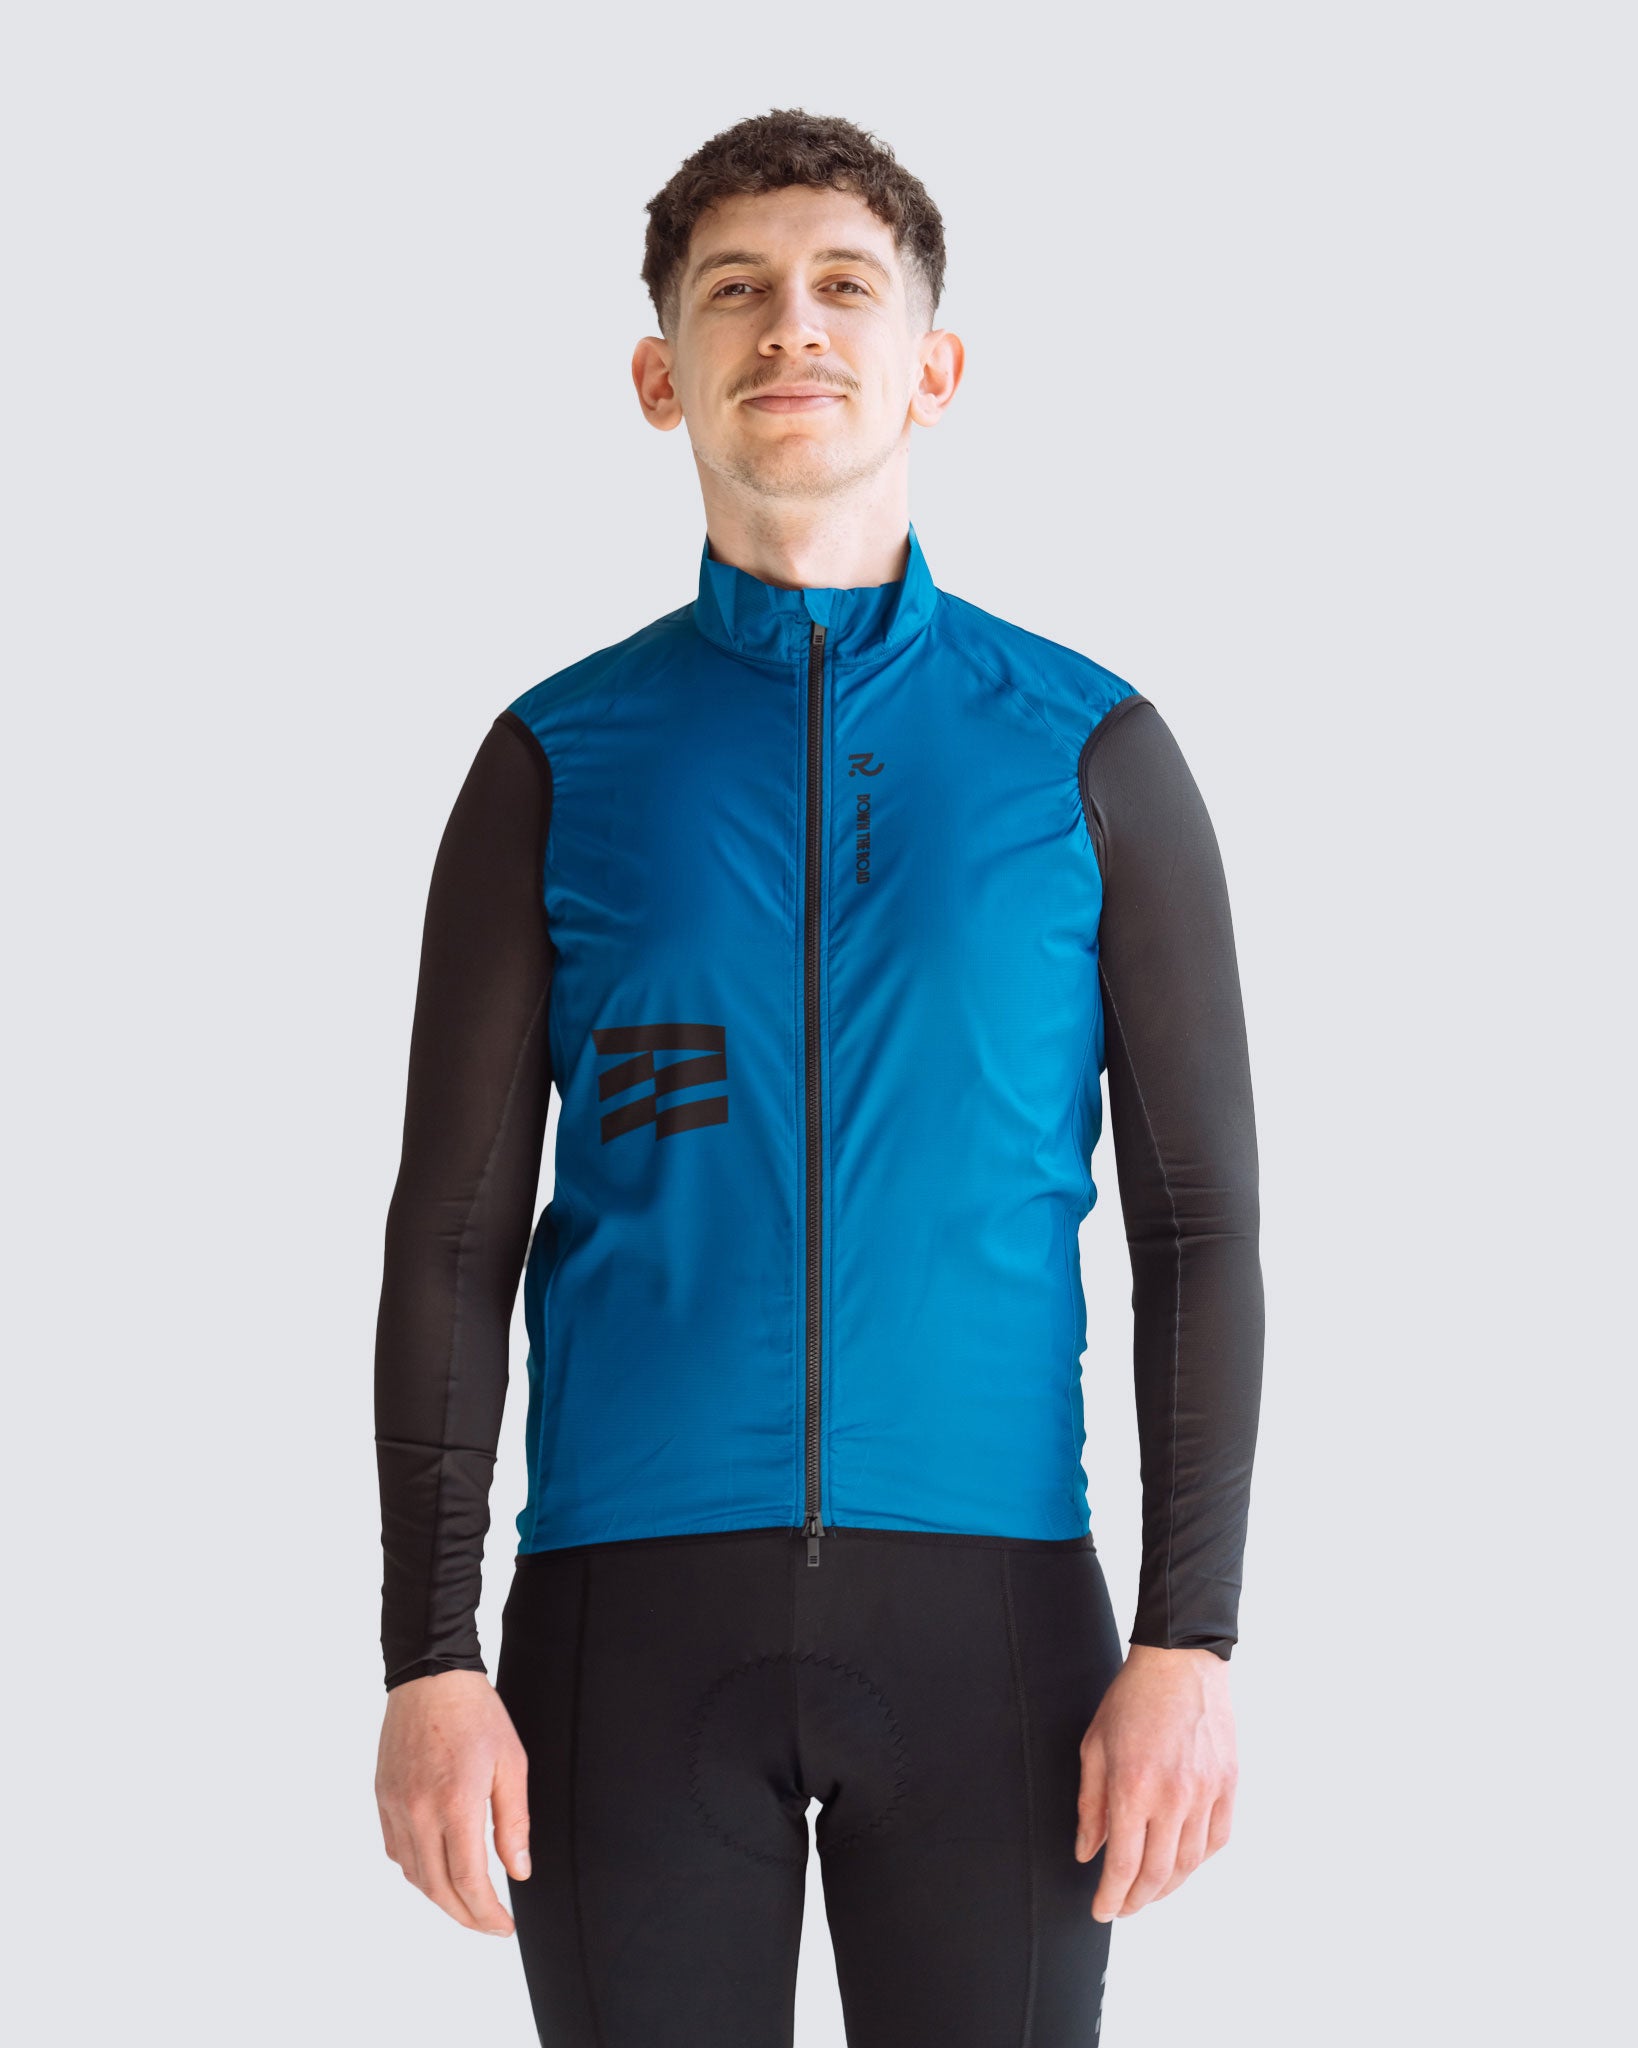 Wavy teal men cycling vest front